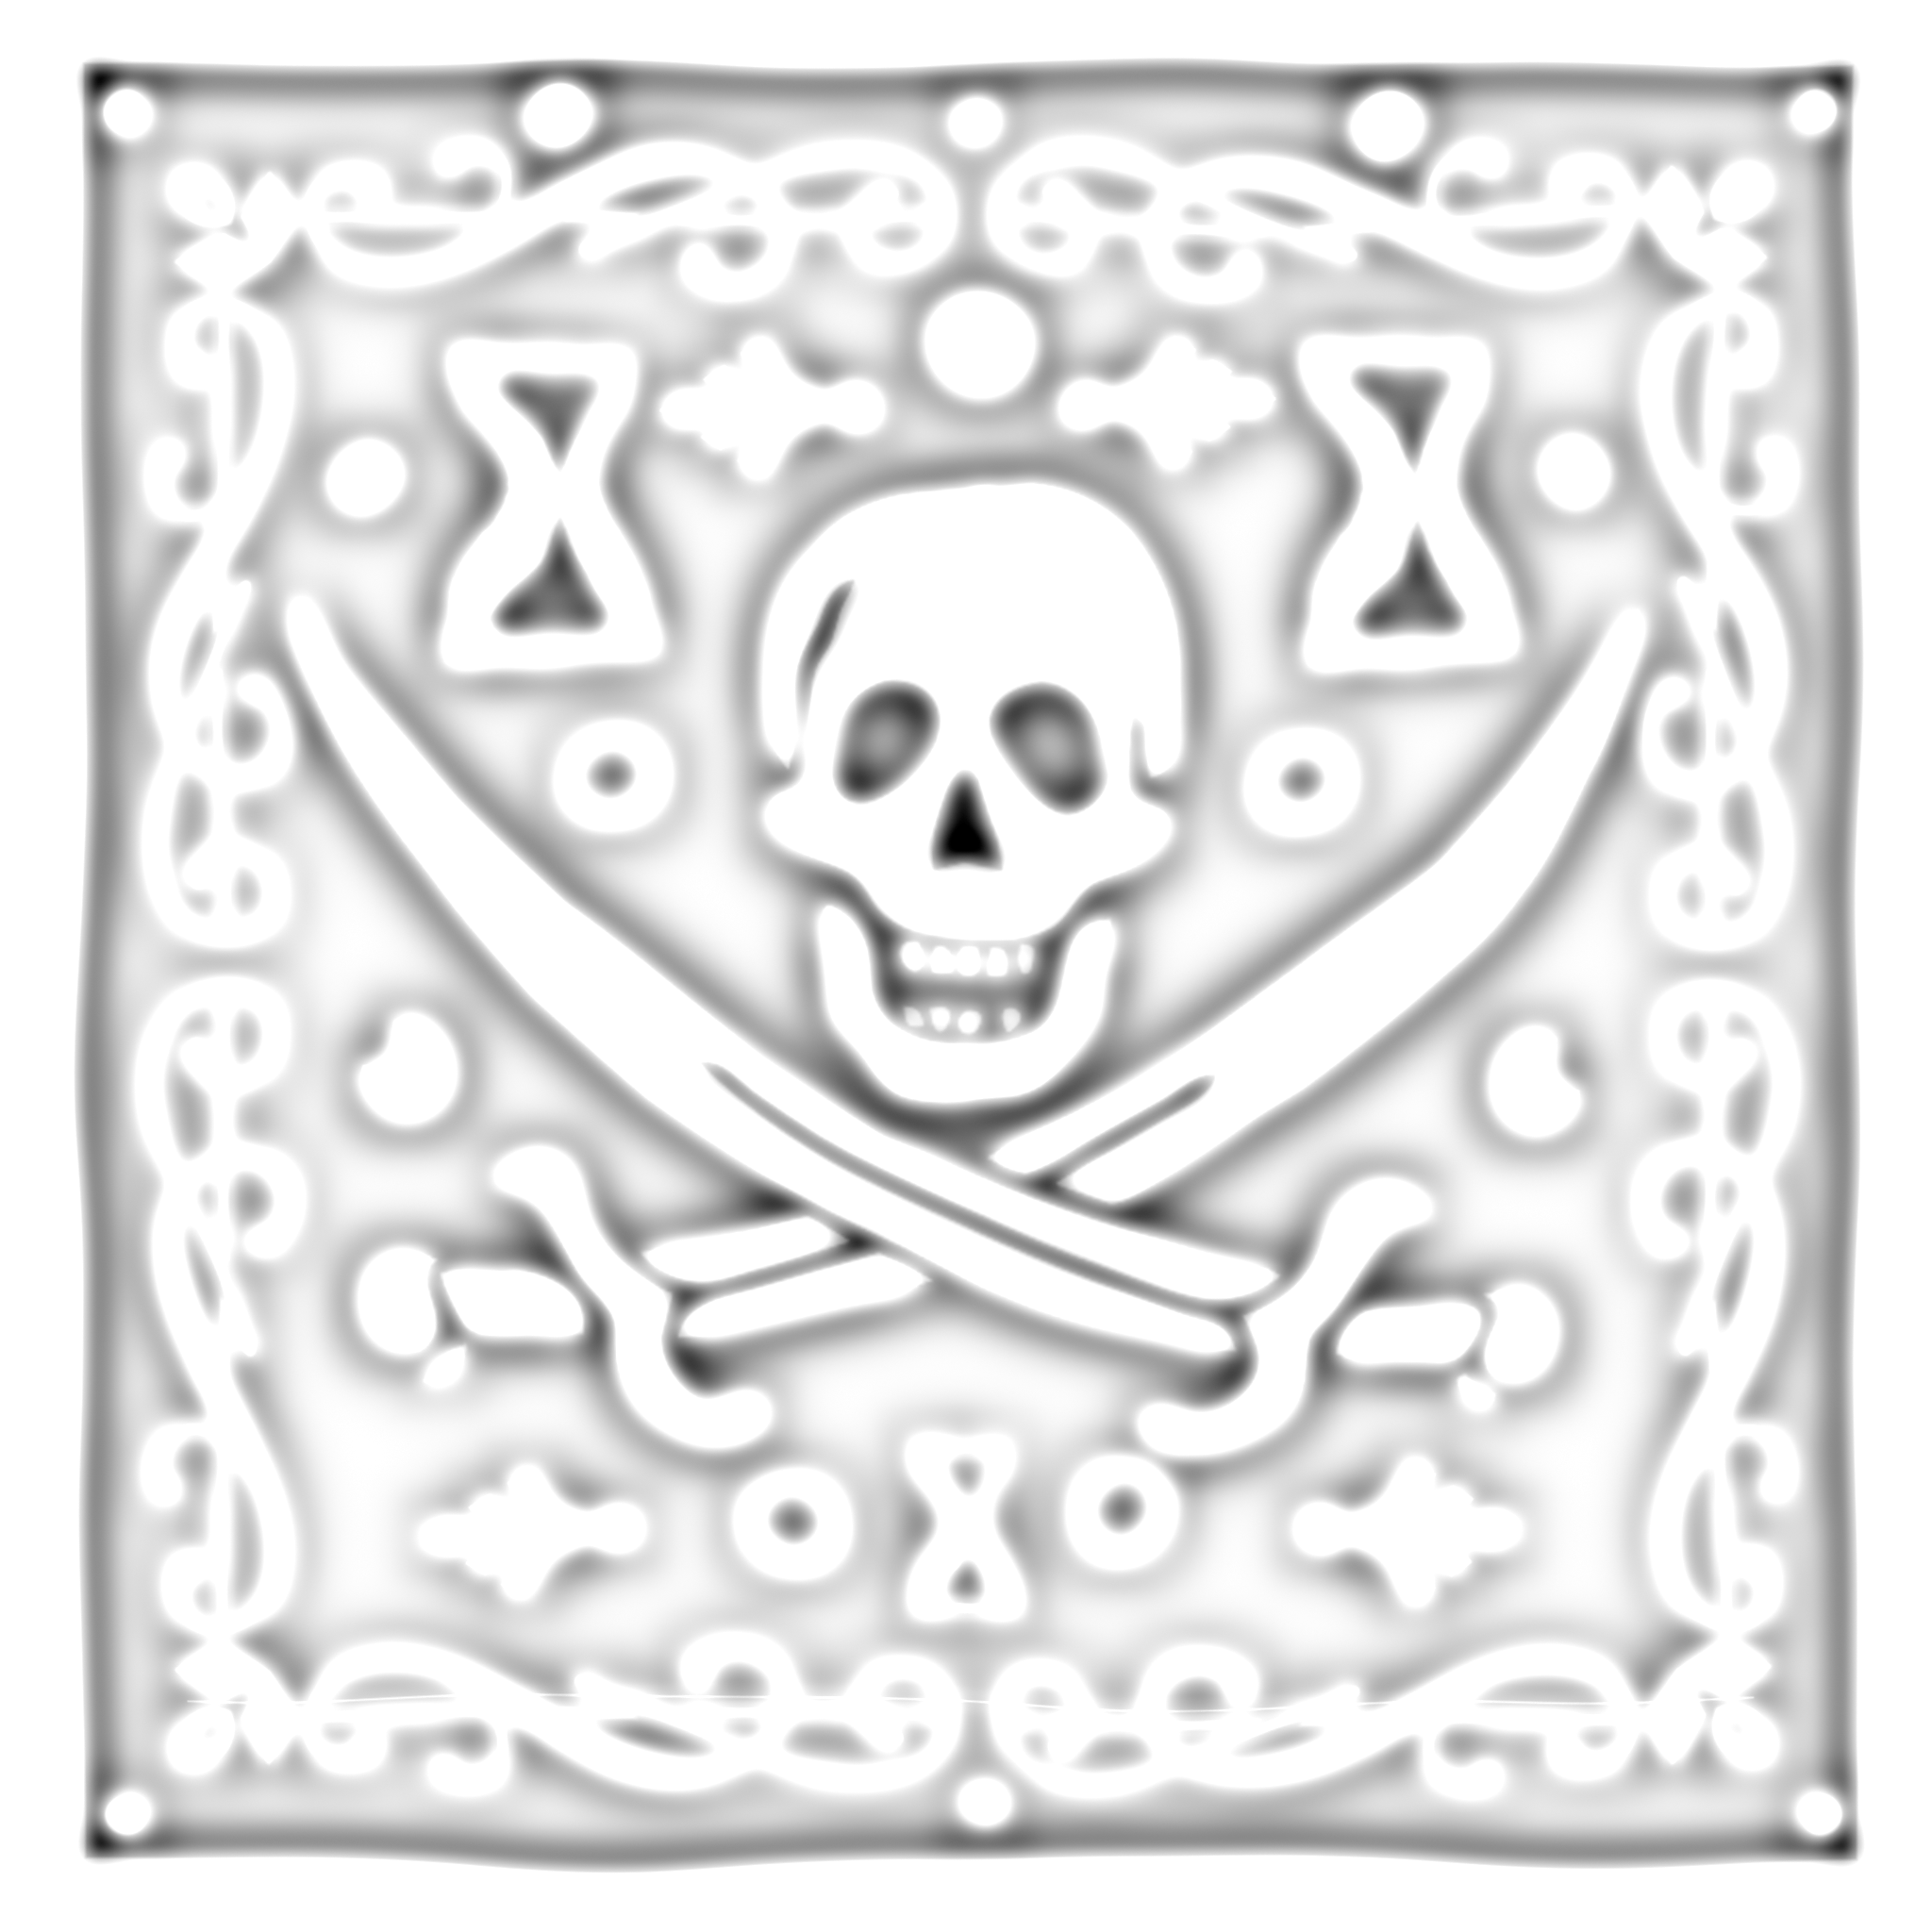 Assets/PBR6PIC/4-pirate-gold/pirate-gold_ao.png